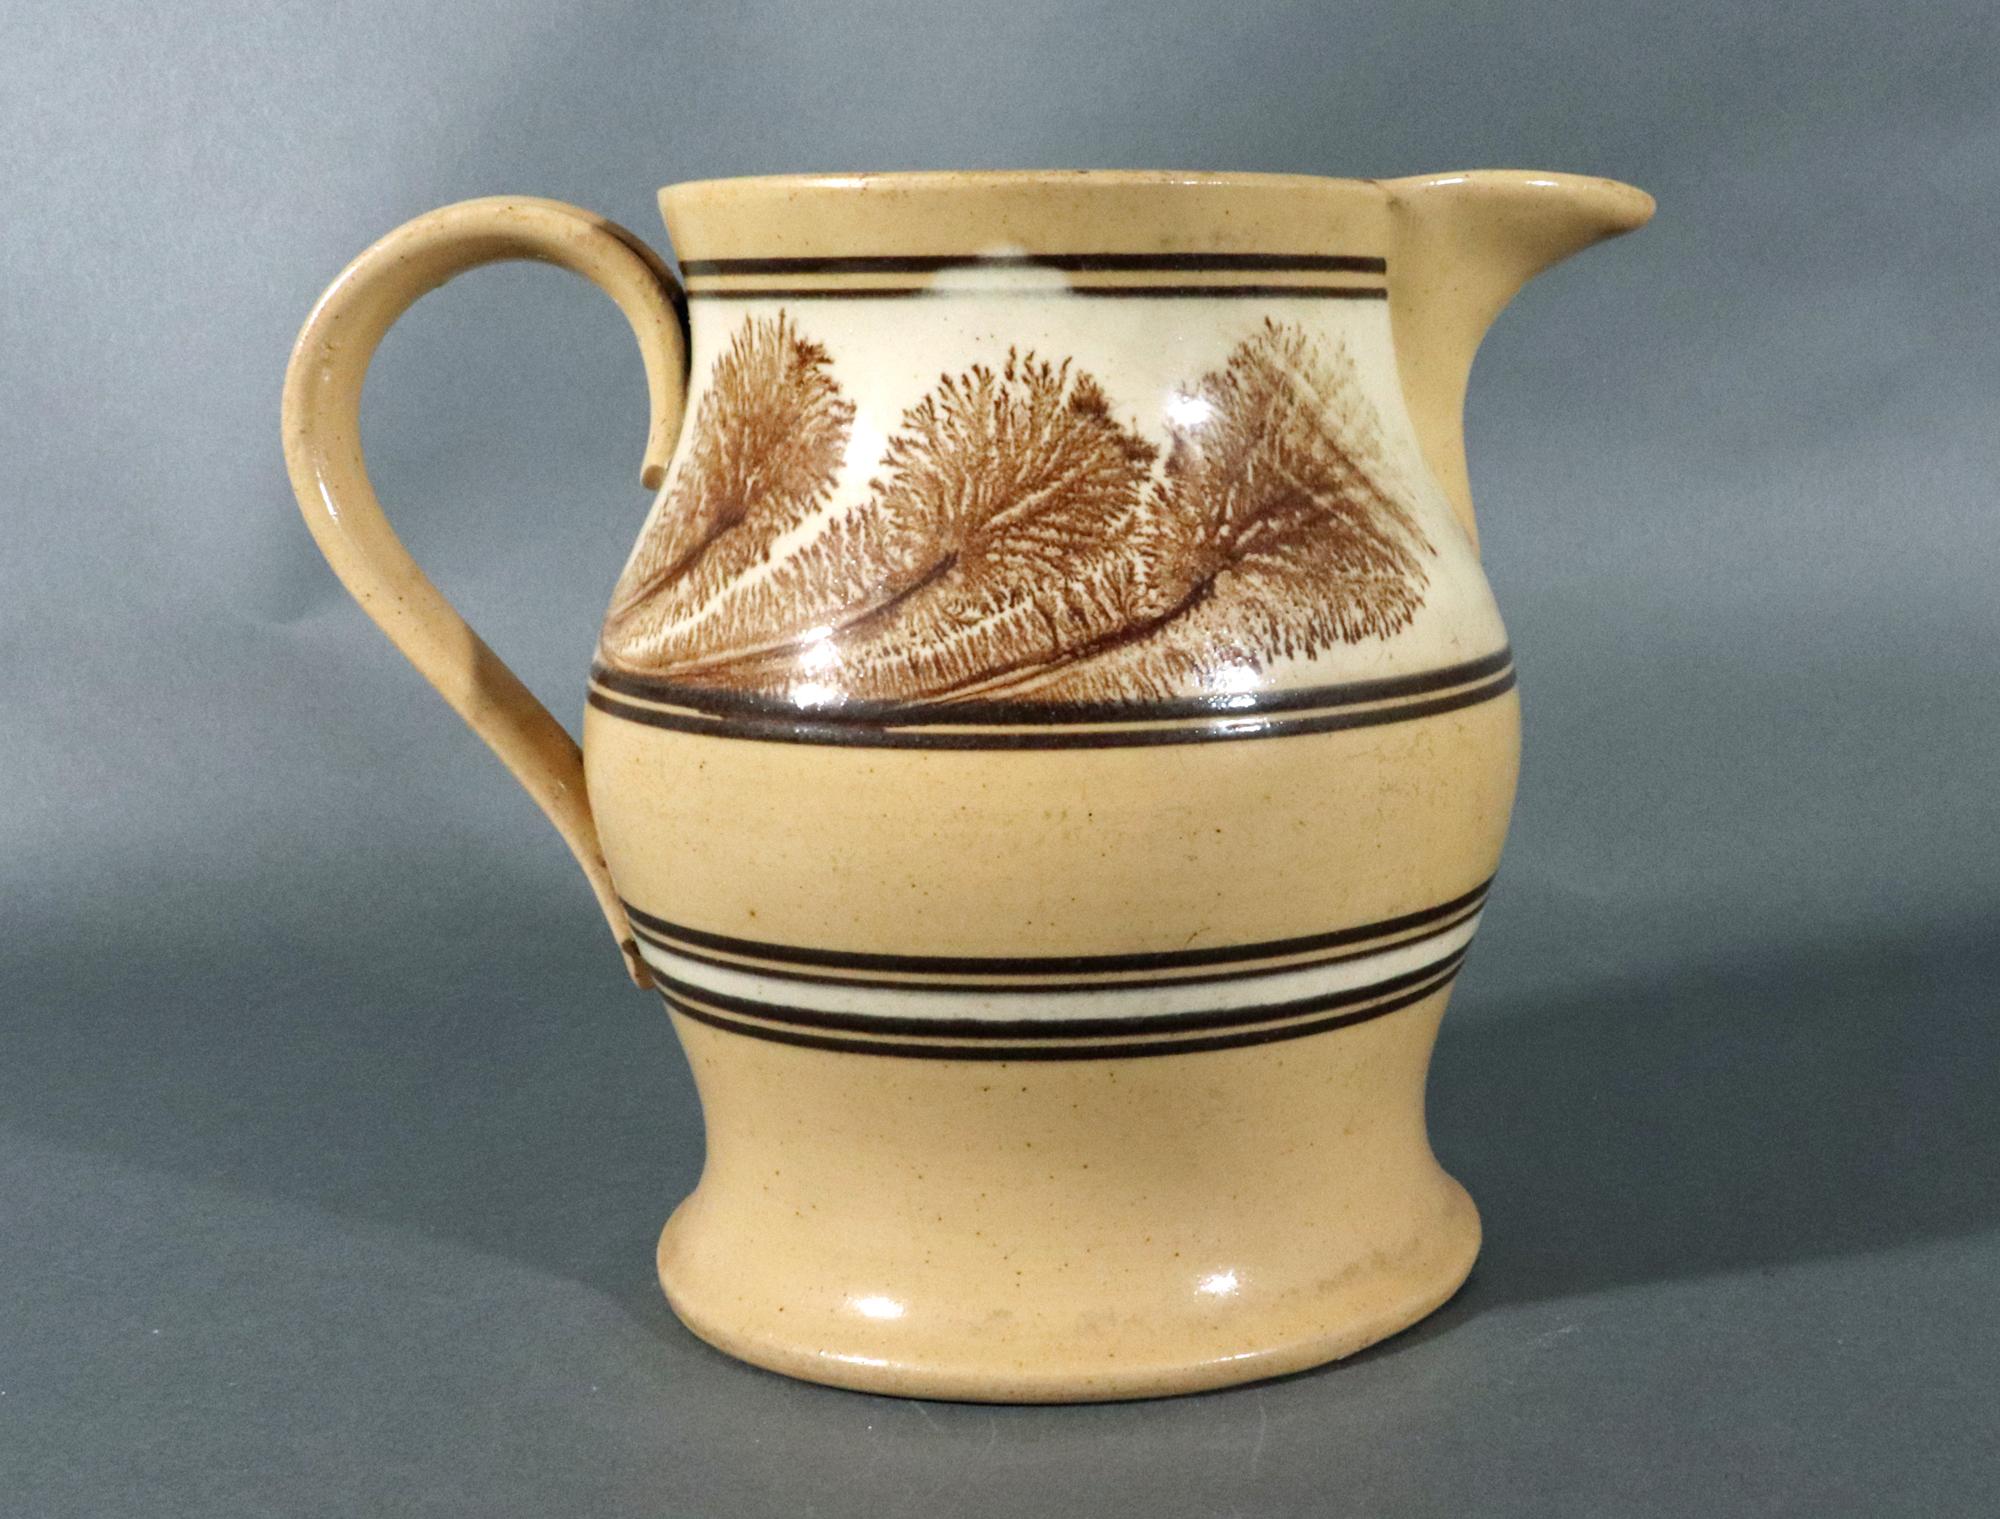 American Mocha Yellow Ware Jug with Puce Seaweed Decoration,
mid-19th century

The American yellow ware bulbous jug has continuous bands of brown and white and a large band of puce sea weed design which runs below the spout and through the ridged